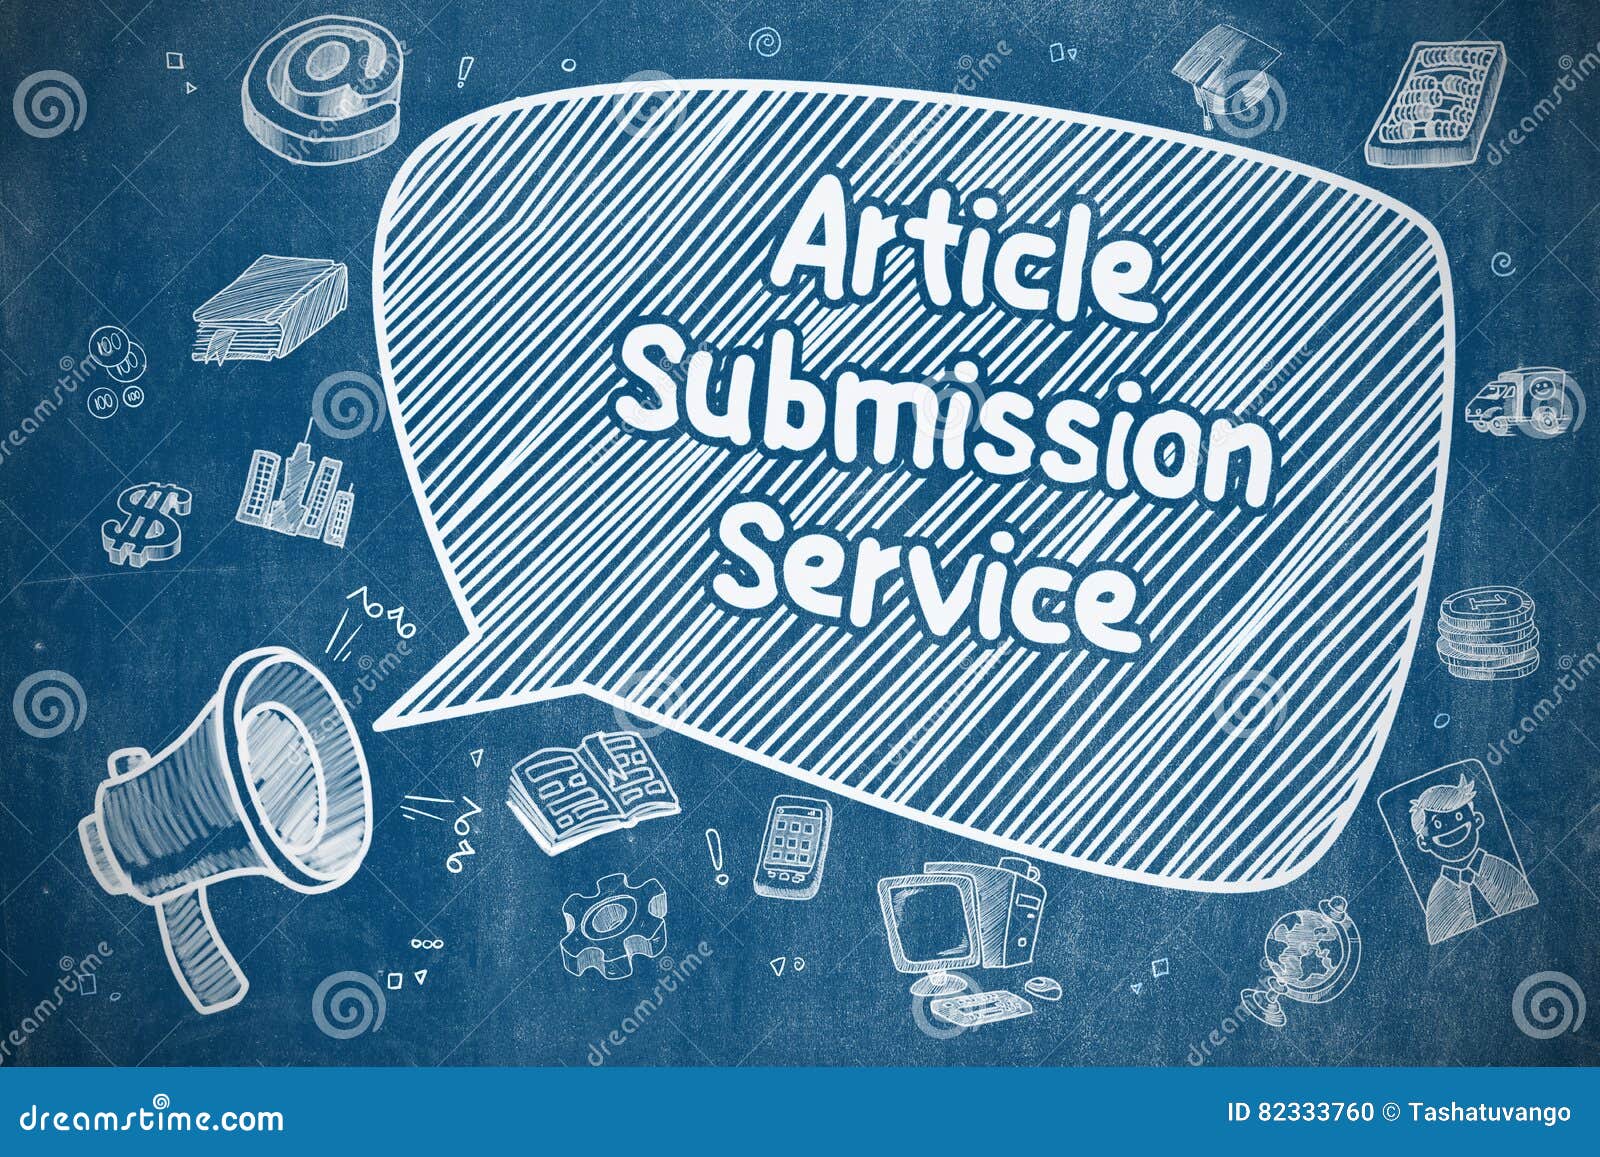 article submission service - business concept.